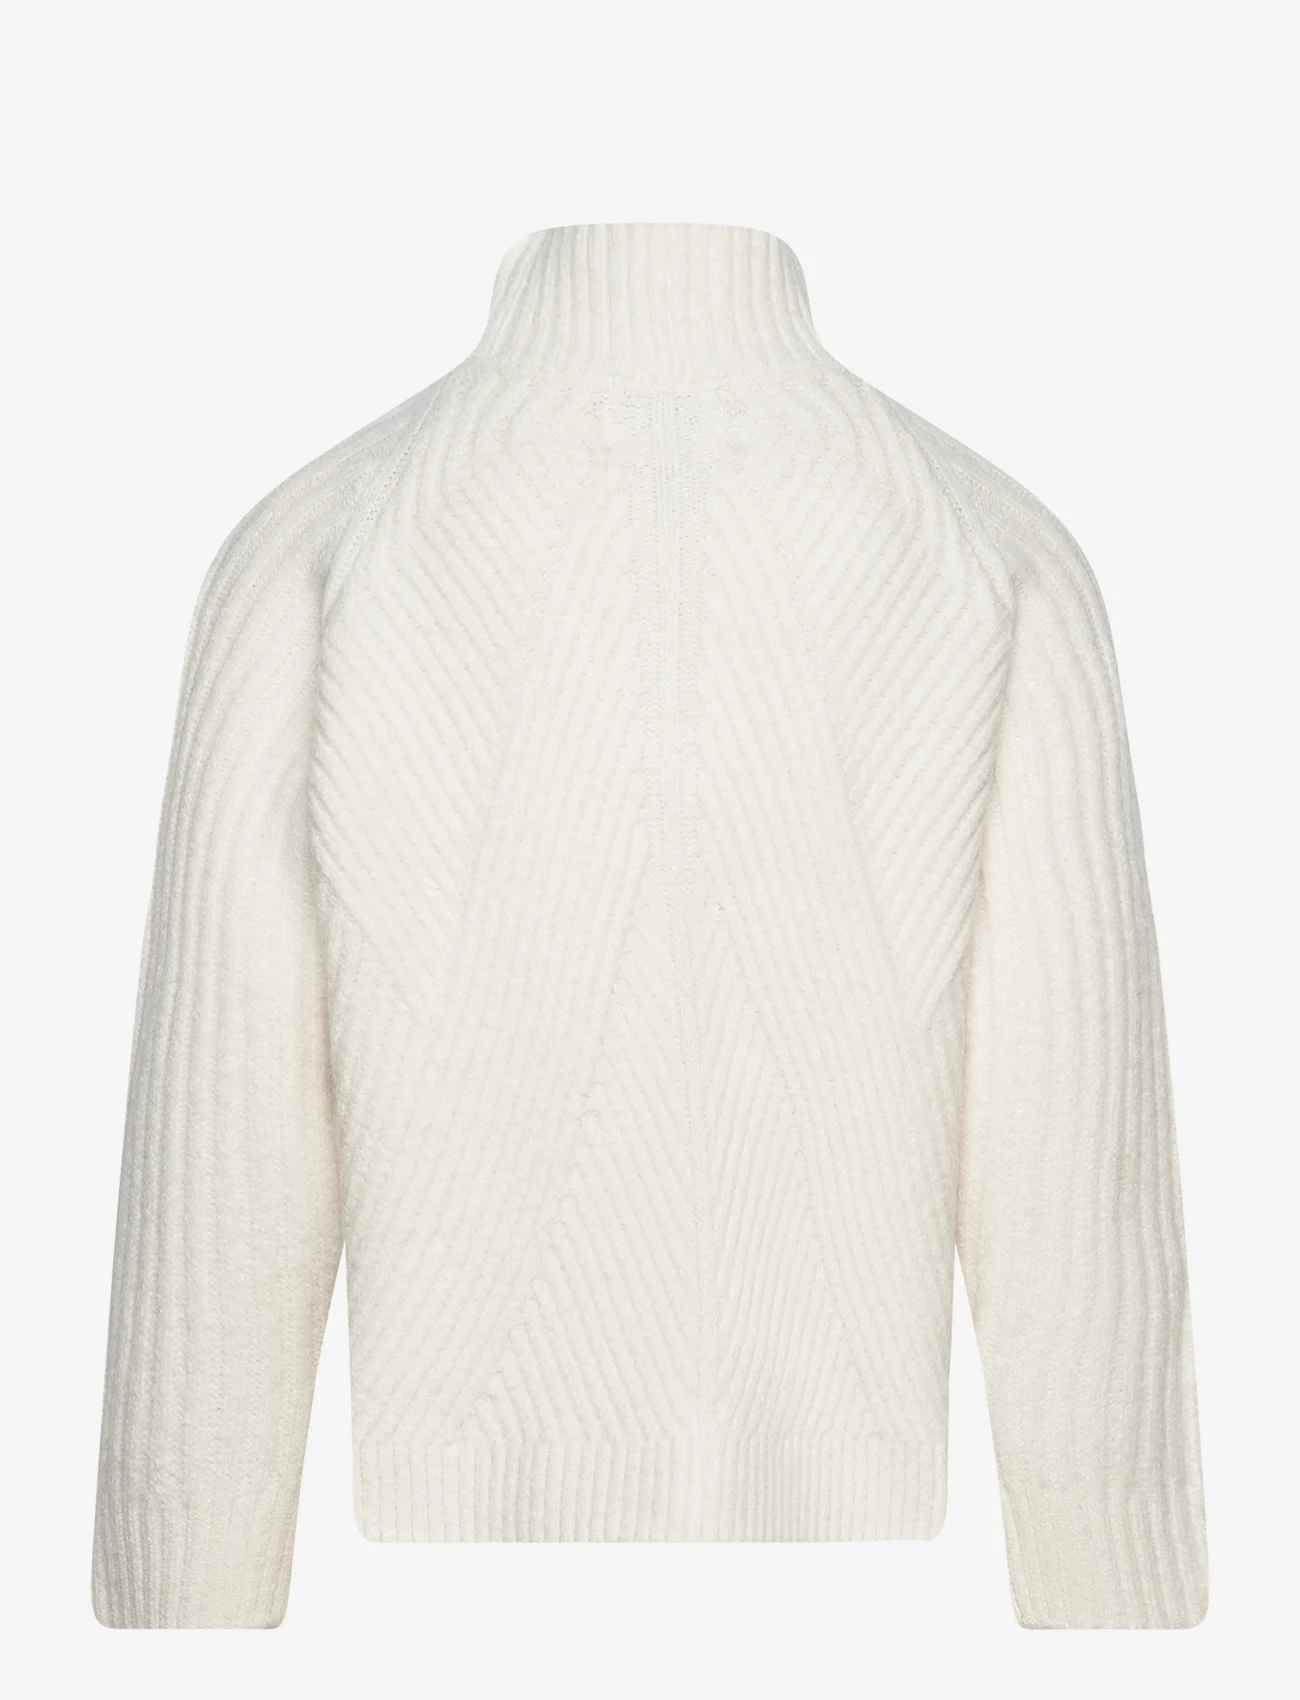 Sofie Schnoor Young - Sweater - gensere - off white - 1